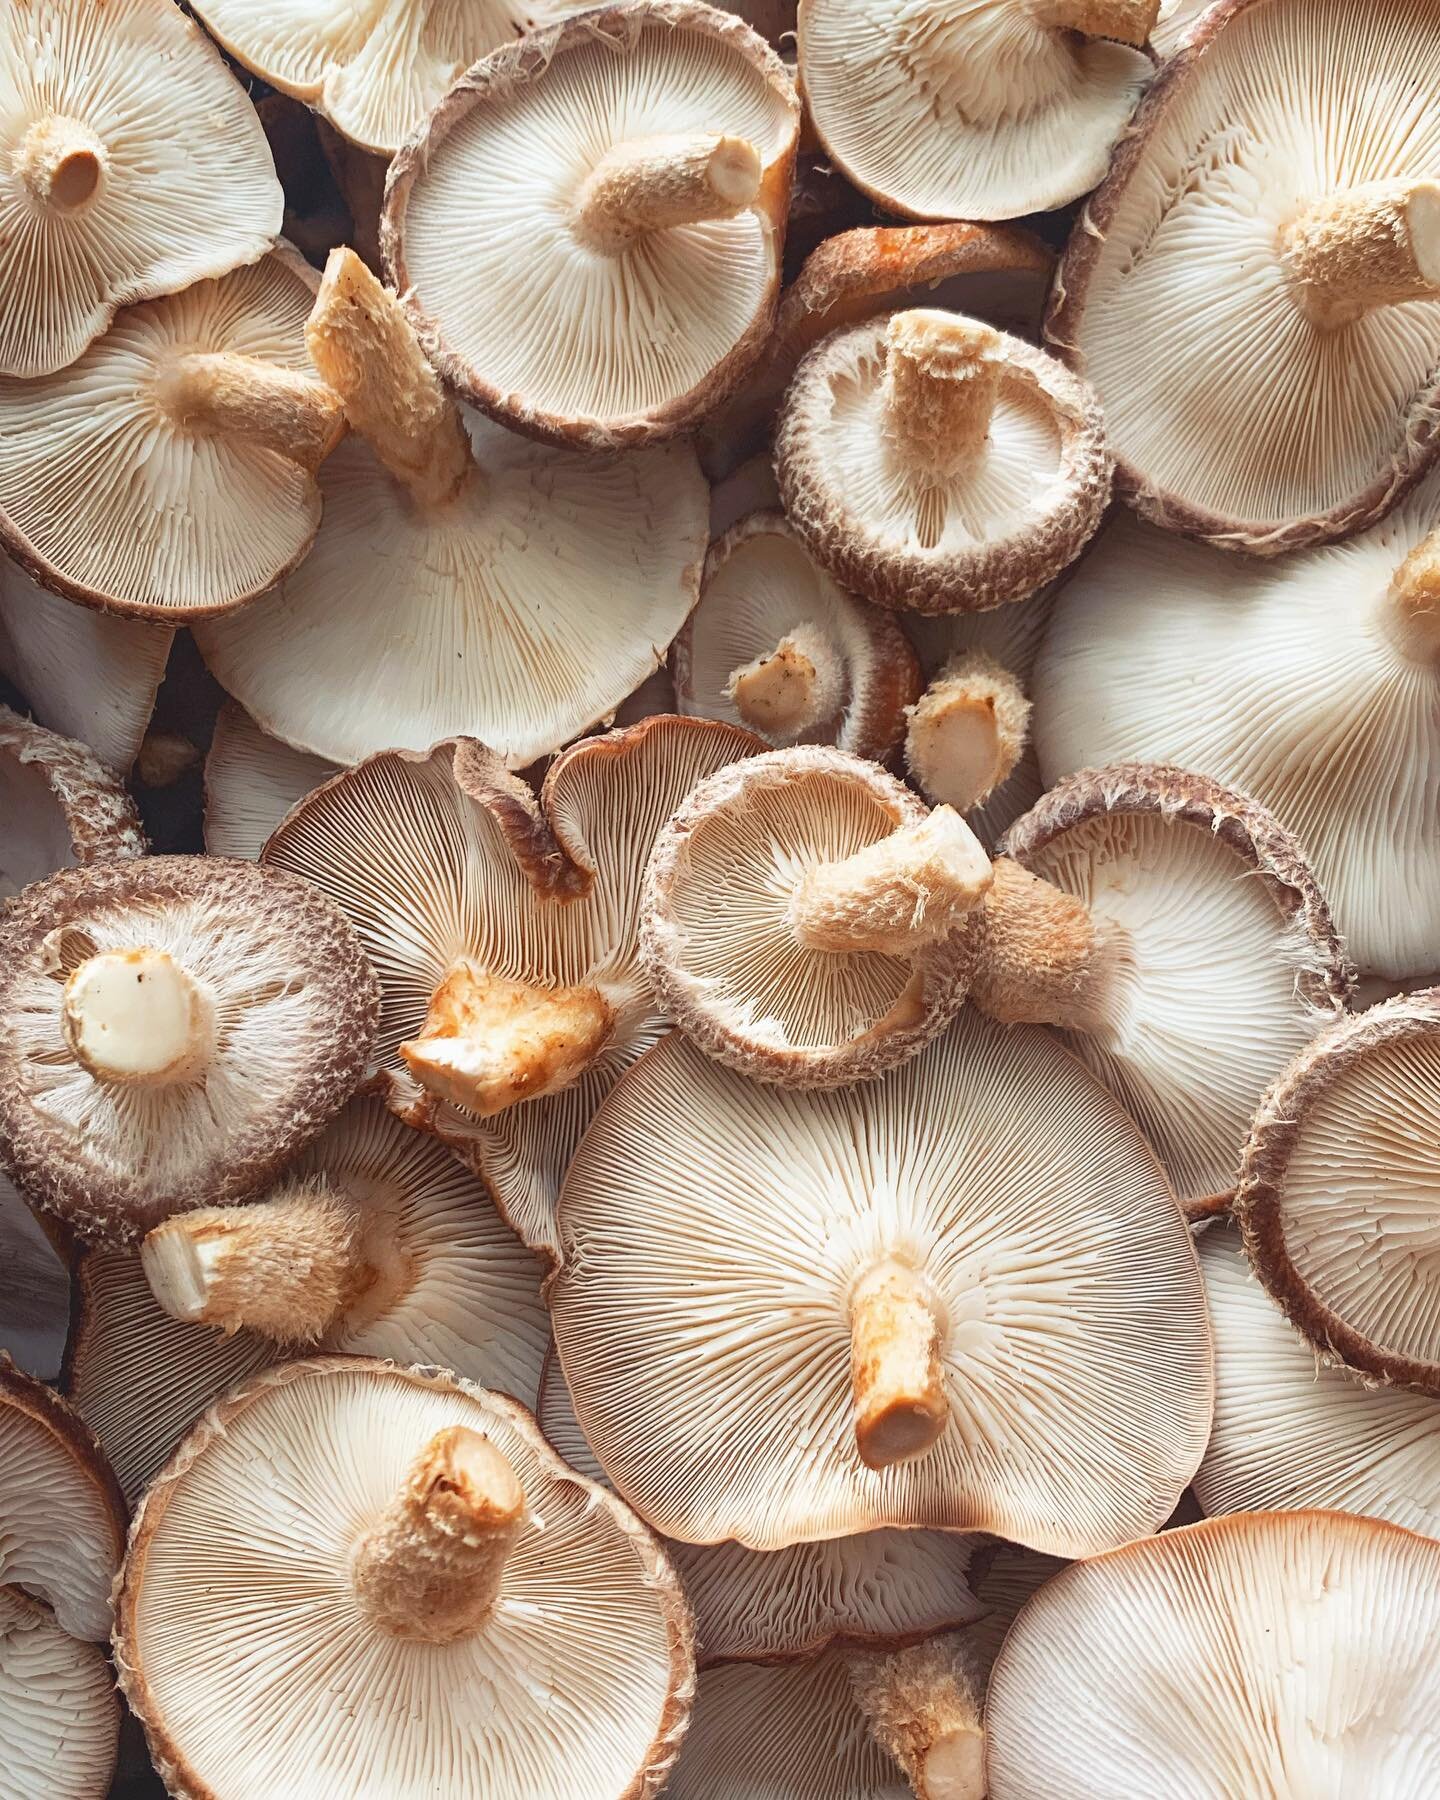 Gills up! 

Have you heard that mushrooms can synthesize their own vitamin D? Maybe by now you have. But did you know that they synthesize vitamin D in a very similar way that we humans and many other mammals do? 

Mushrooms synthesize vitamin D thro